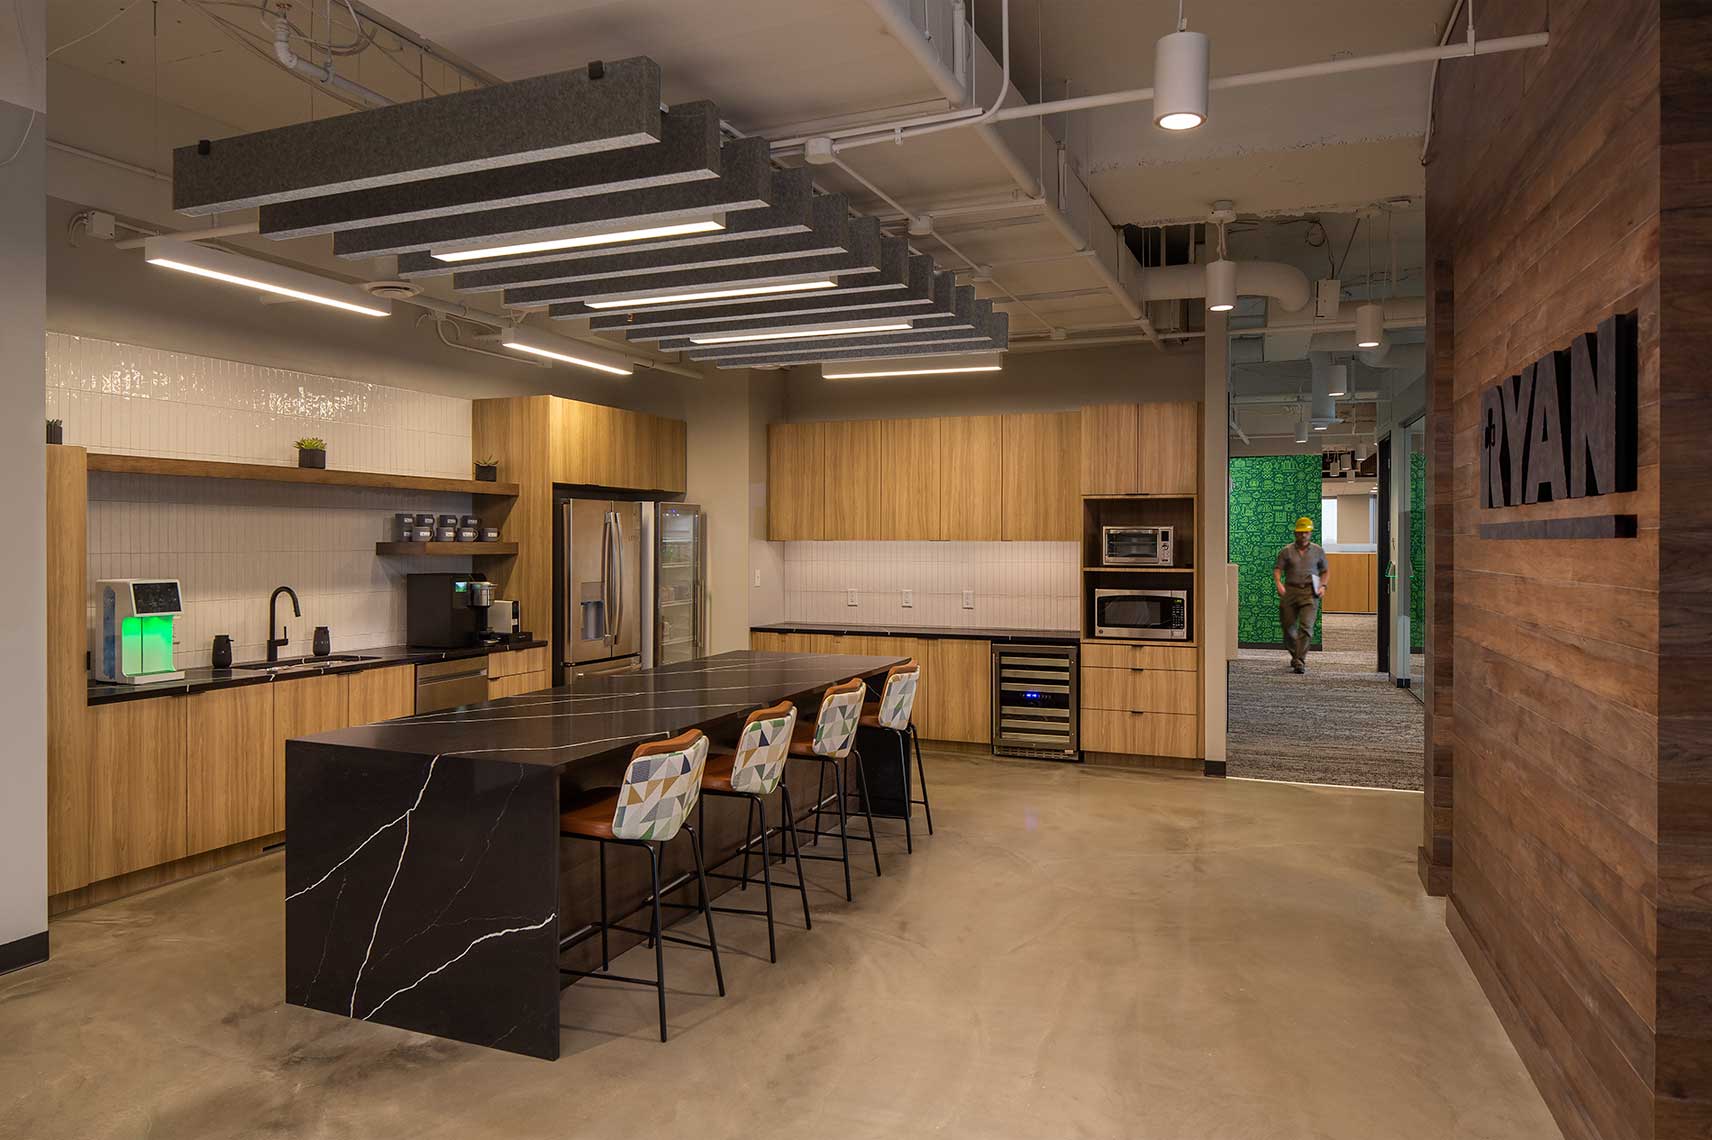 An image of the Break Room within the Ryan Companies' Atlanta offices, showing a warm and expansive area for employees to relax and take a break